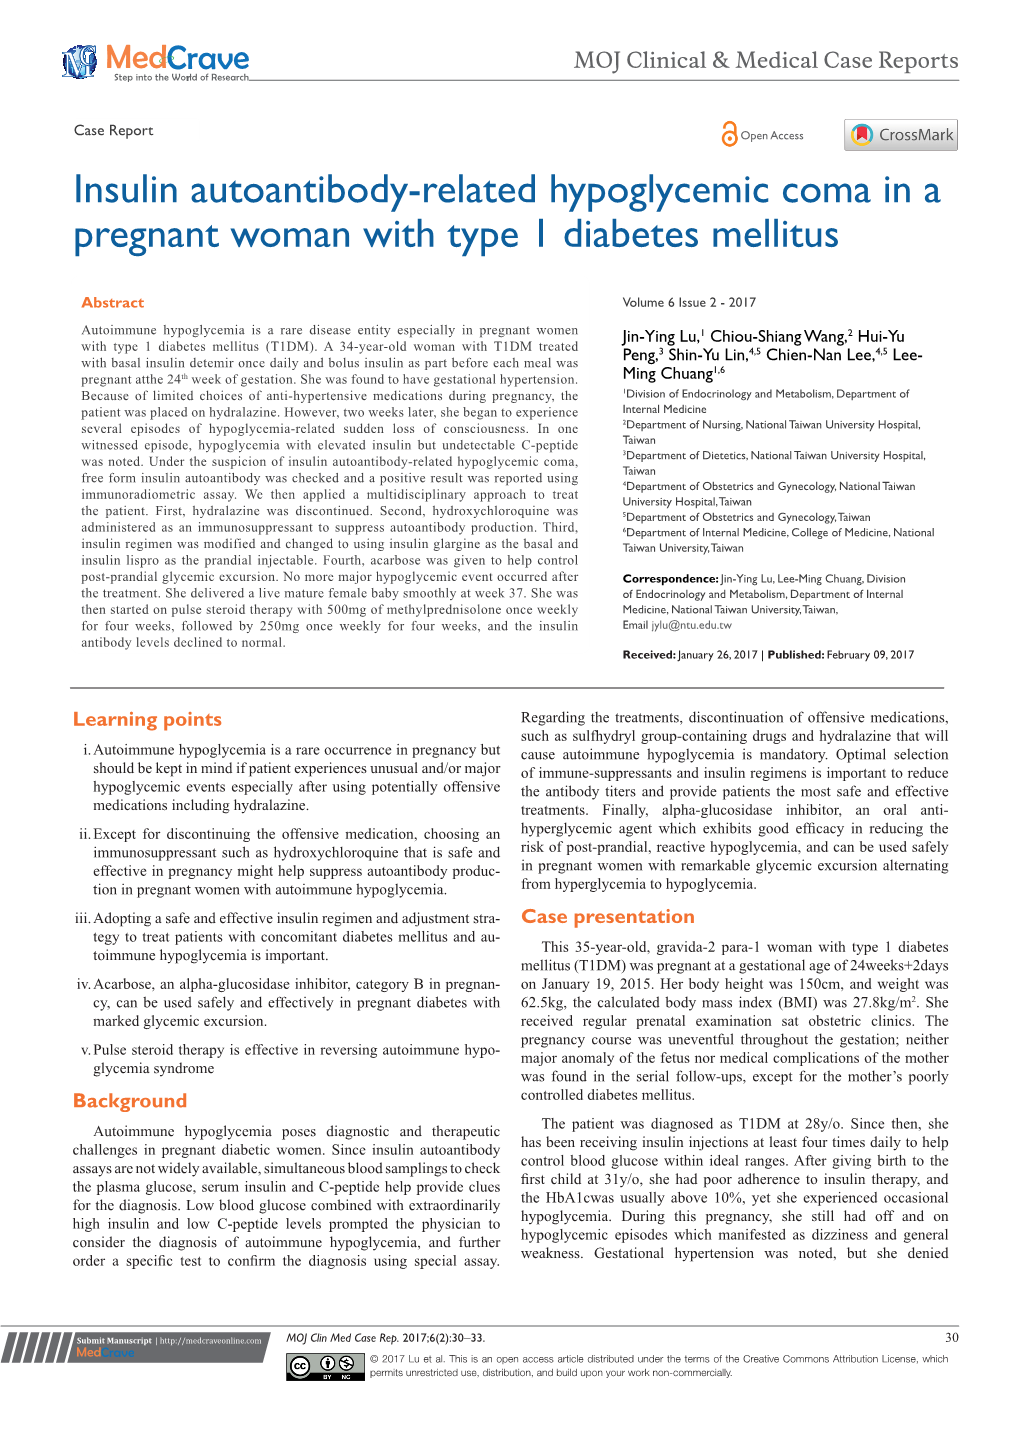 Insulin Autoantibody-Related Hypoglycemic Coma in a Pregnant Woman with Type 1 Diabetes Mellitus